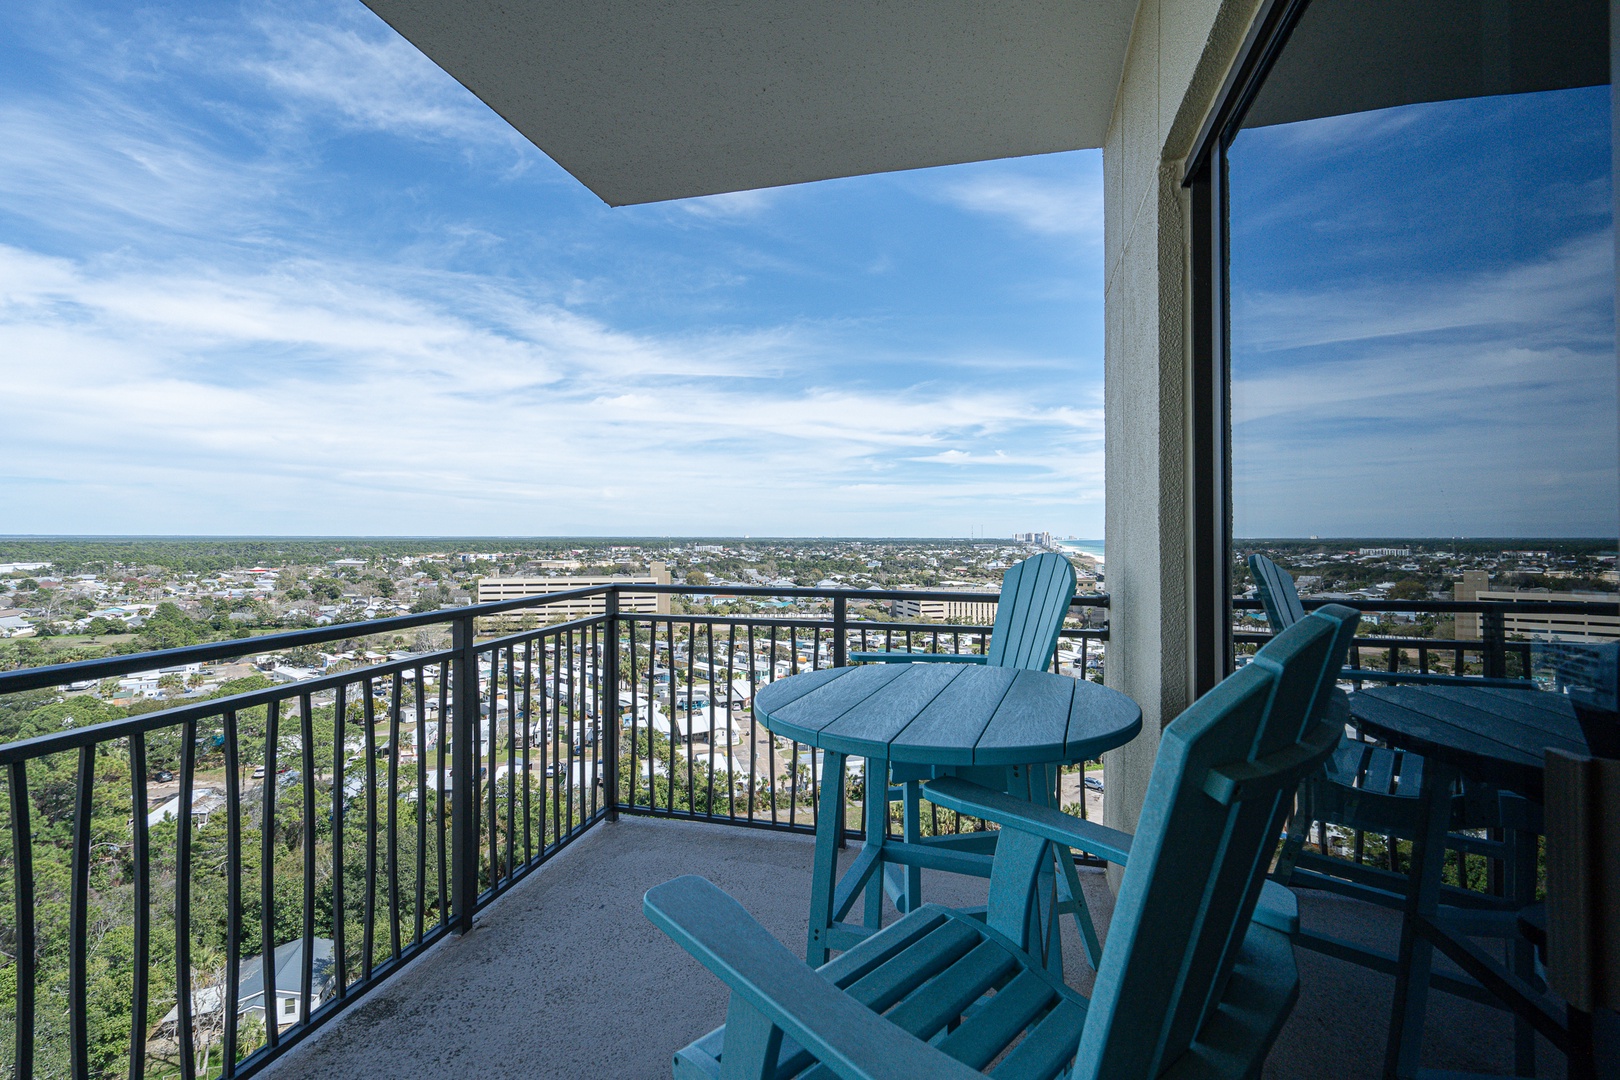 Sip your coffee or a drink in the fresh air with stunning balcony views